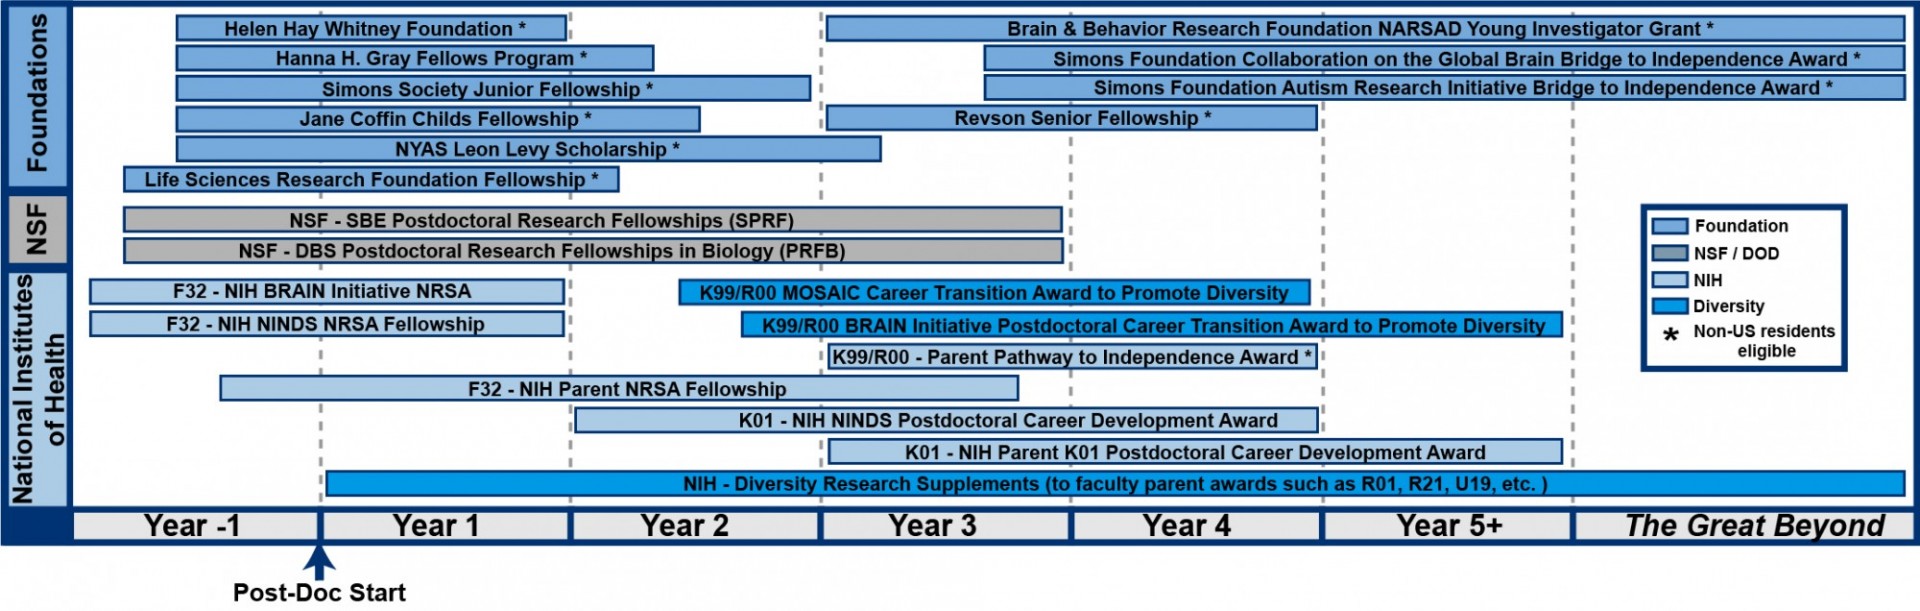 Postdoc funding map showing funding opportunities offered by foundations, NSF, and NIH from the year before starting the postdoc to year 5+ and the great beyond. All detailed information is reproduced in the tables below.